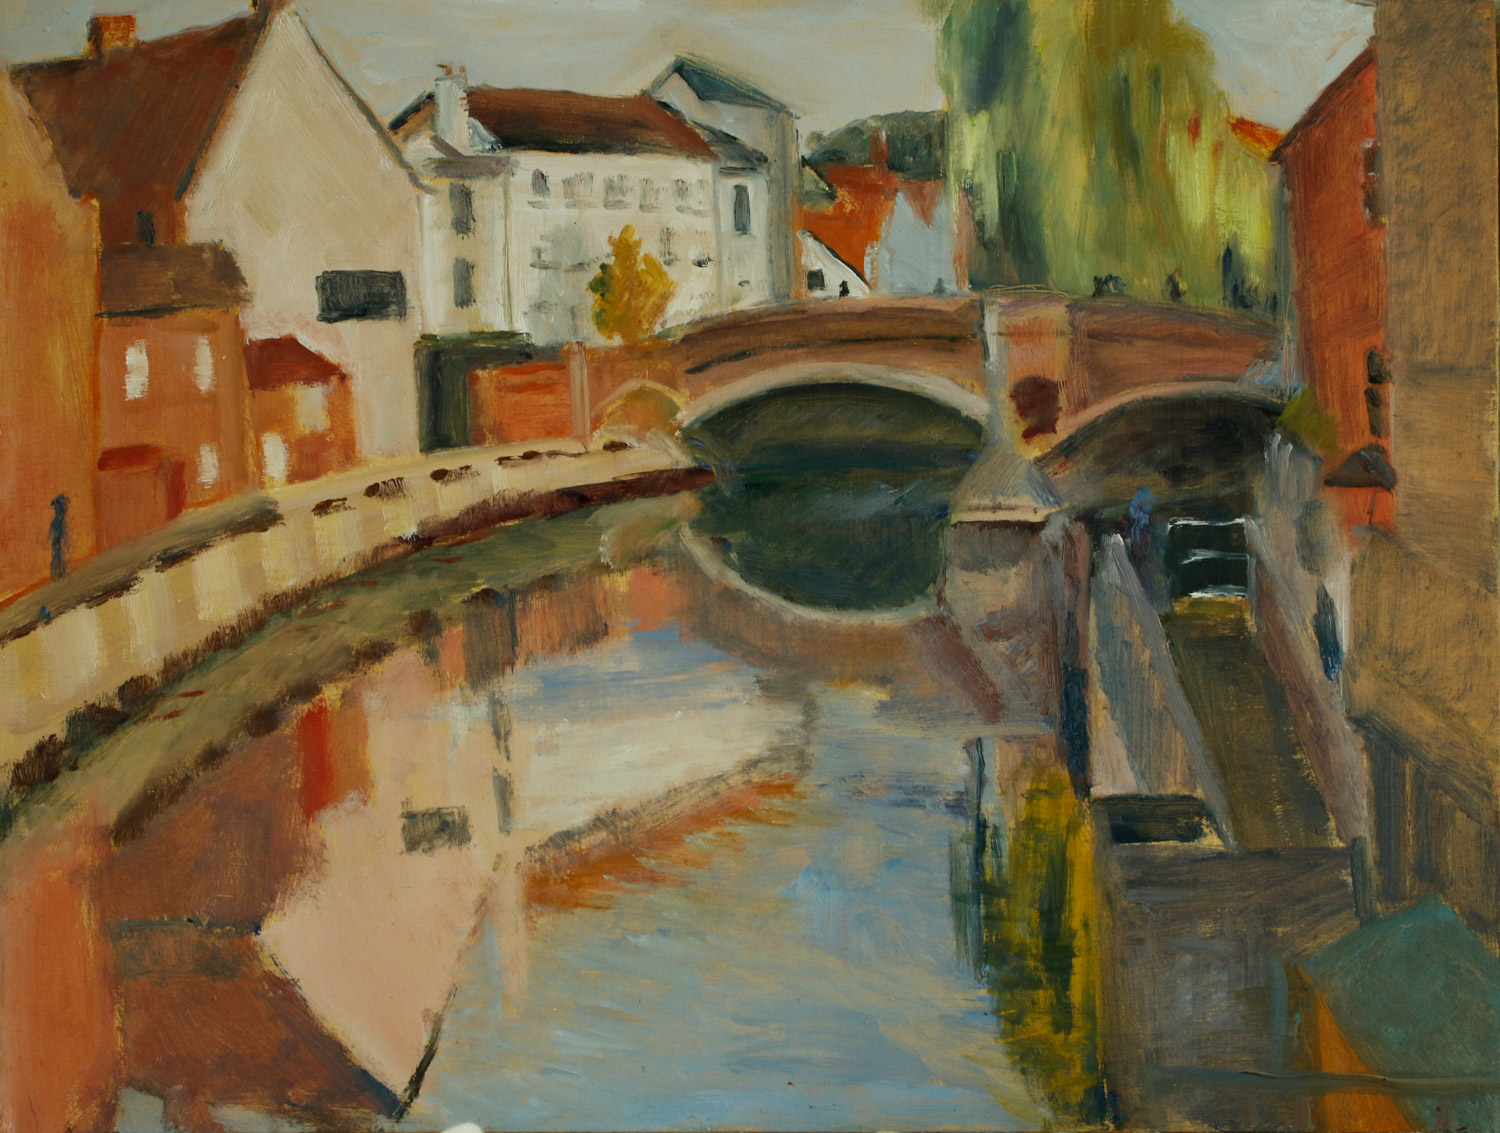 Artist Mary MacCarthy - Reflections, £200 12x16 Oil on Board at Paint Out Norwich 2015